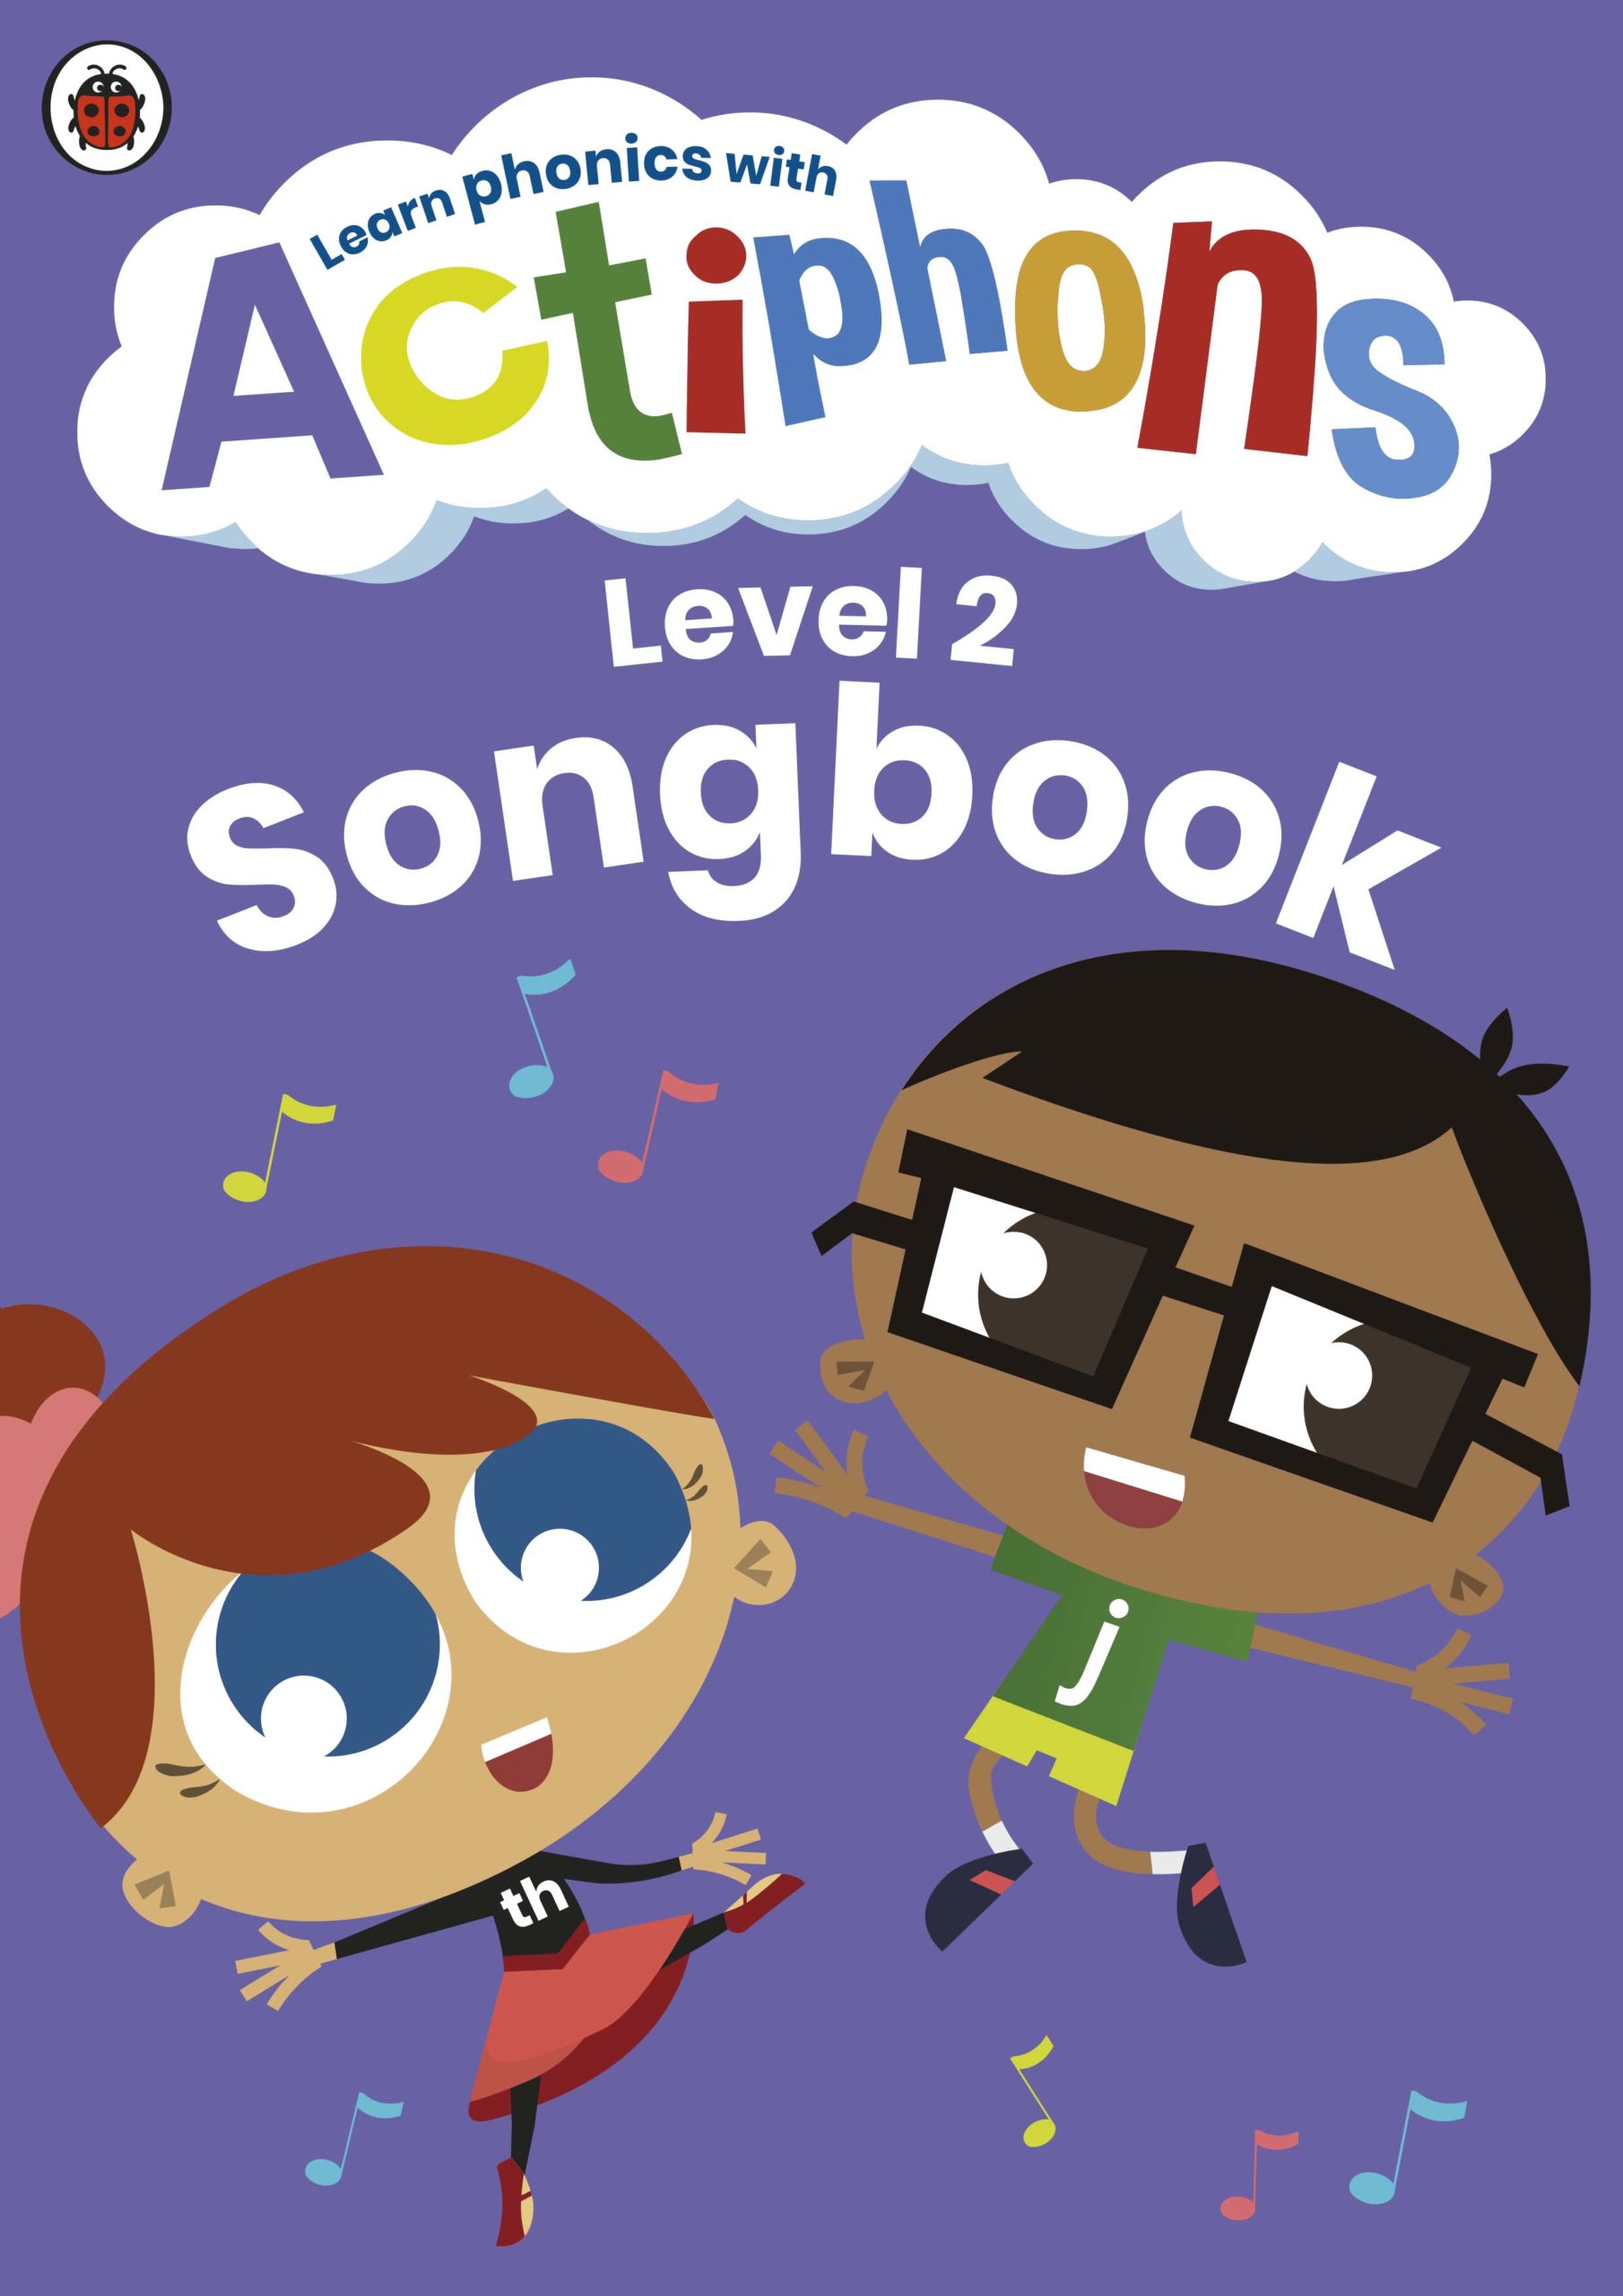 Actiphons Level 2 Songbook